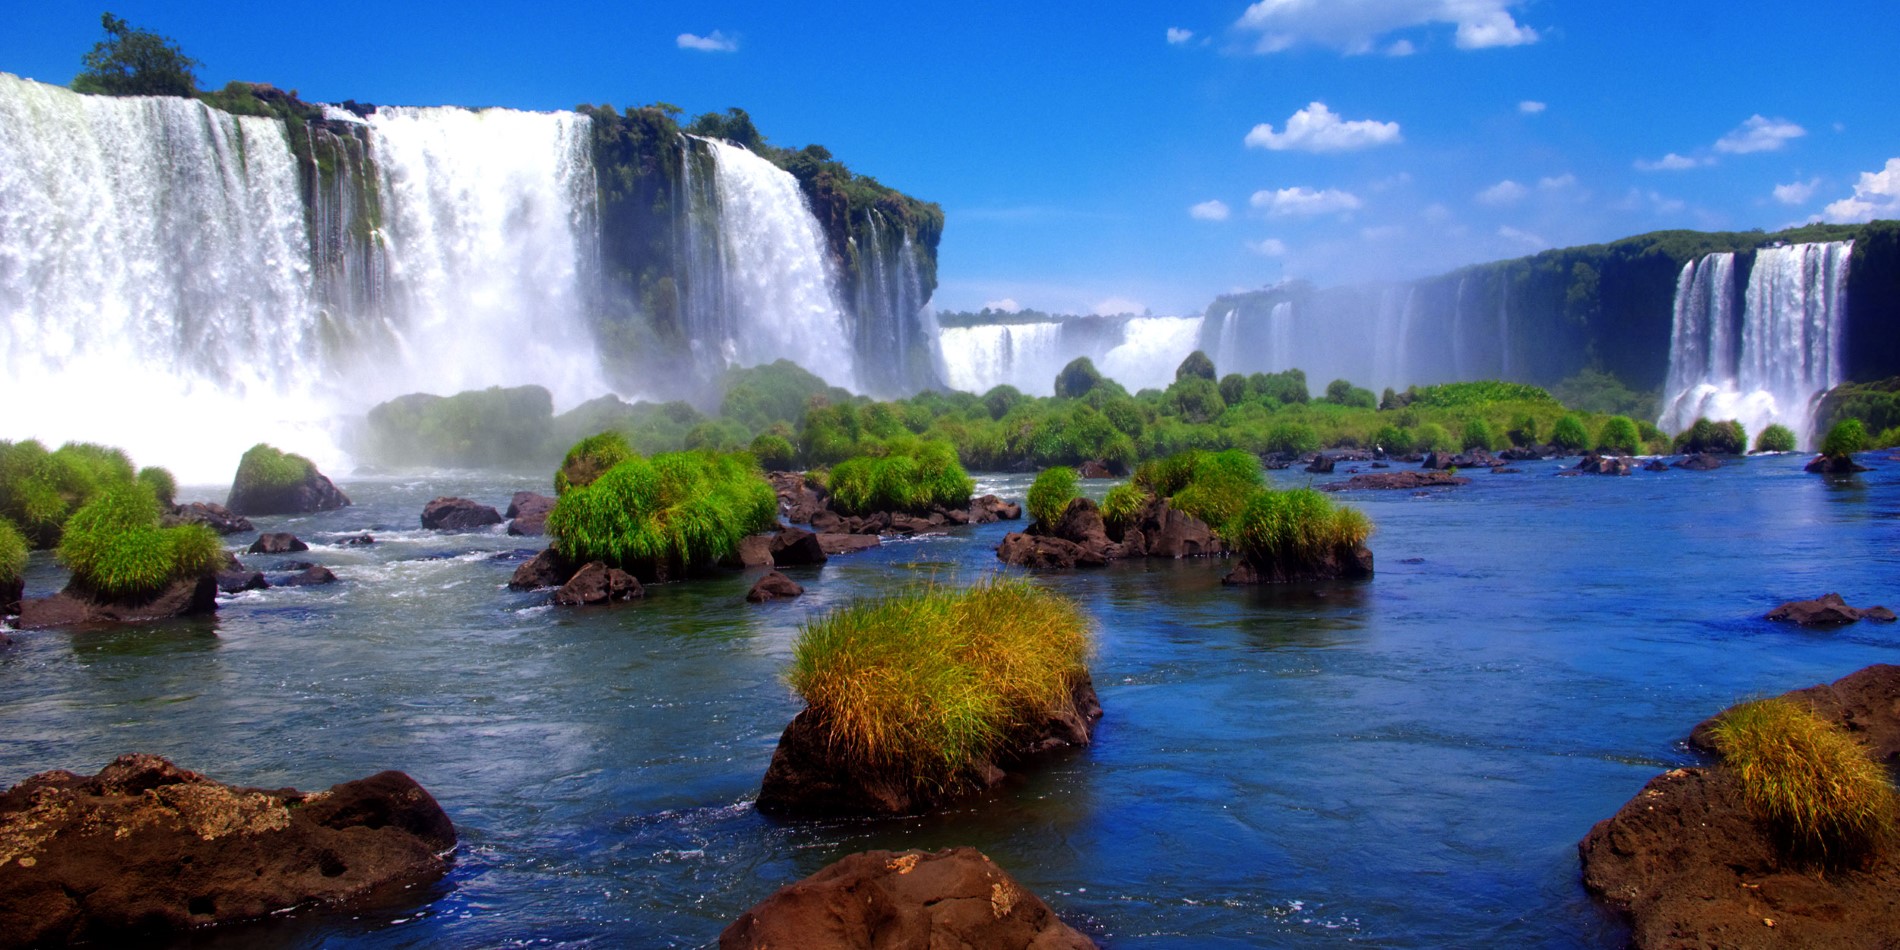 See the great Iguazu Falls on this tour